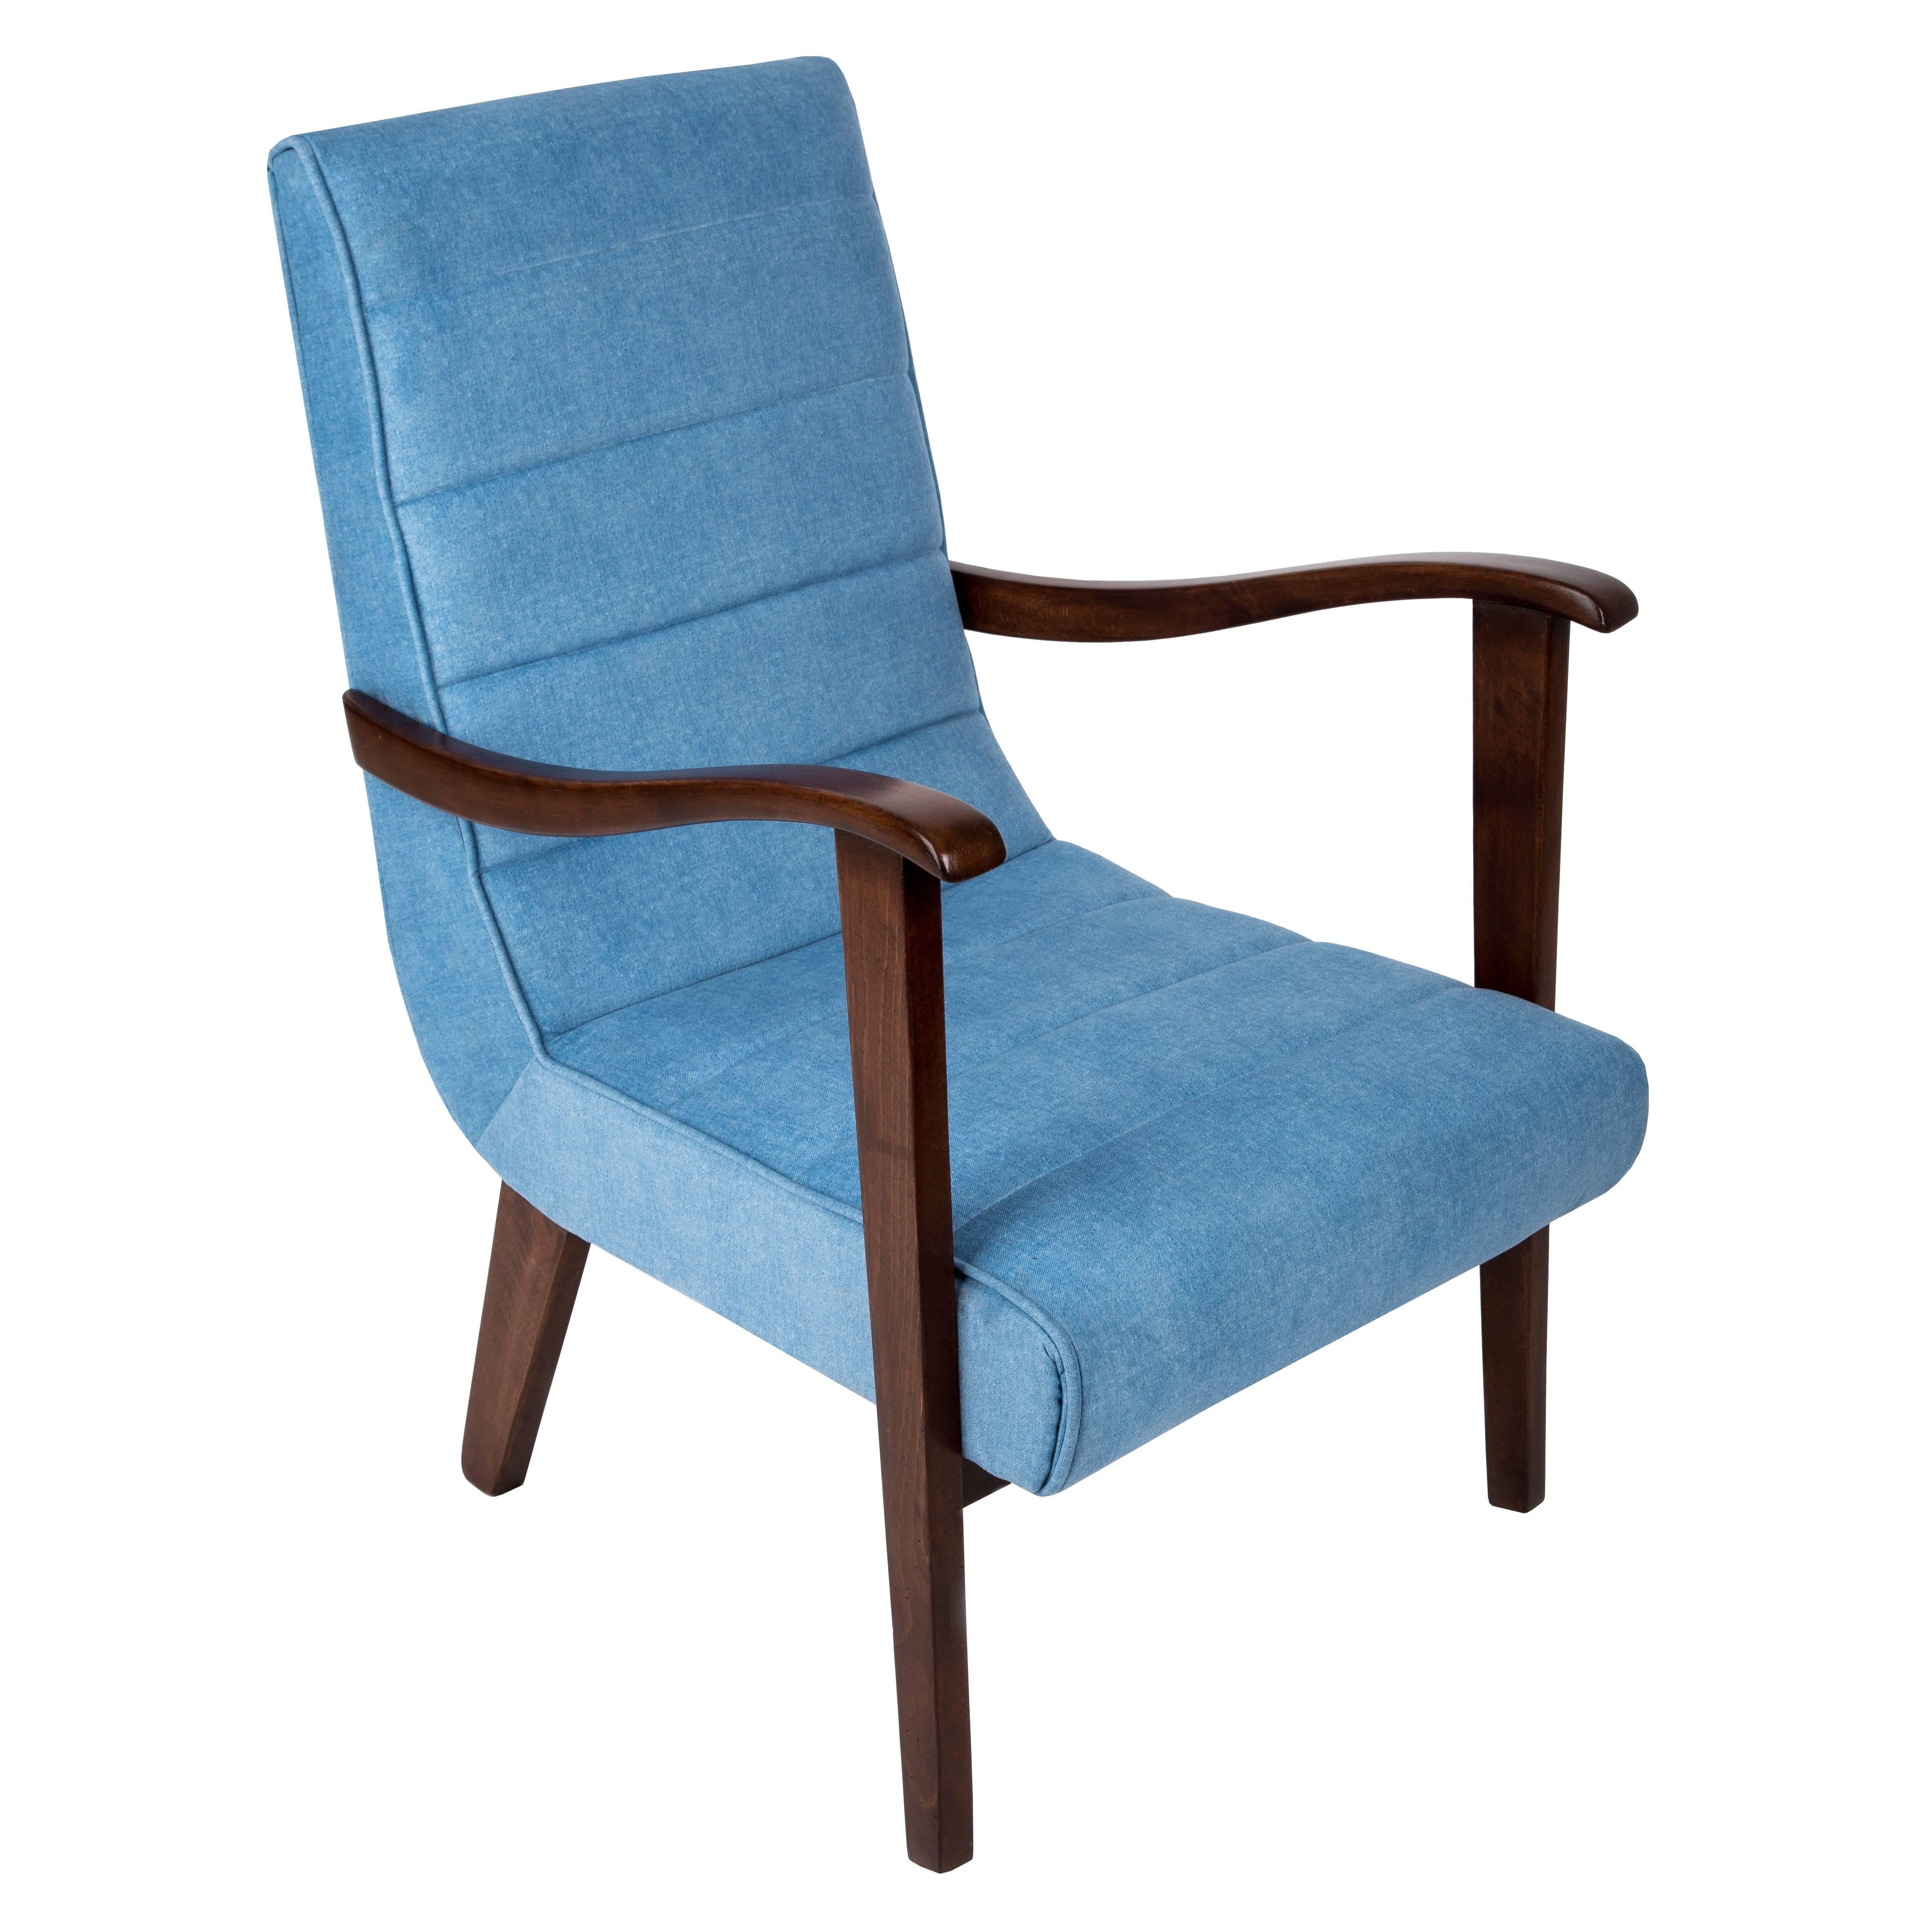 Mid-Century Modern Blue Armchair by Prudnik Furniture Factory, 1960s, Poland For Sale